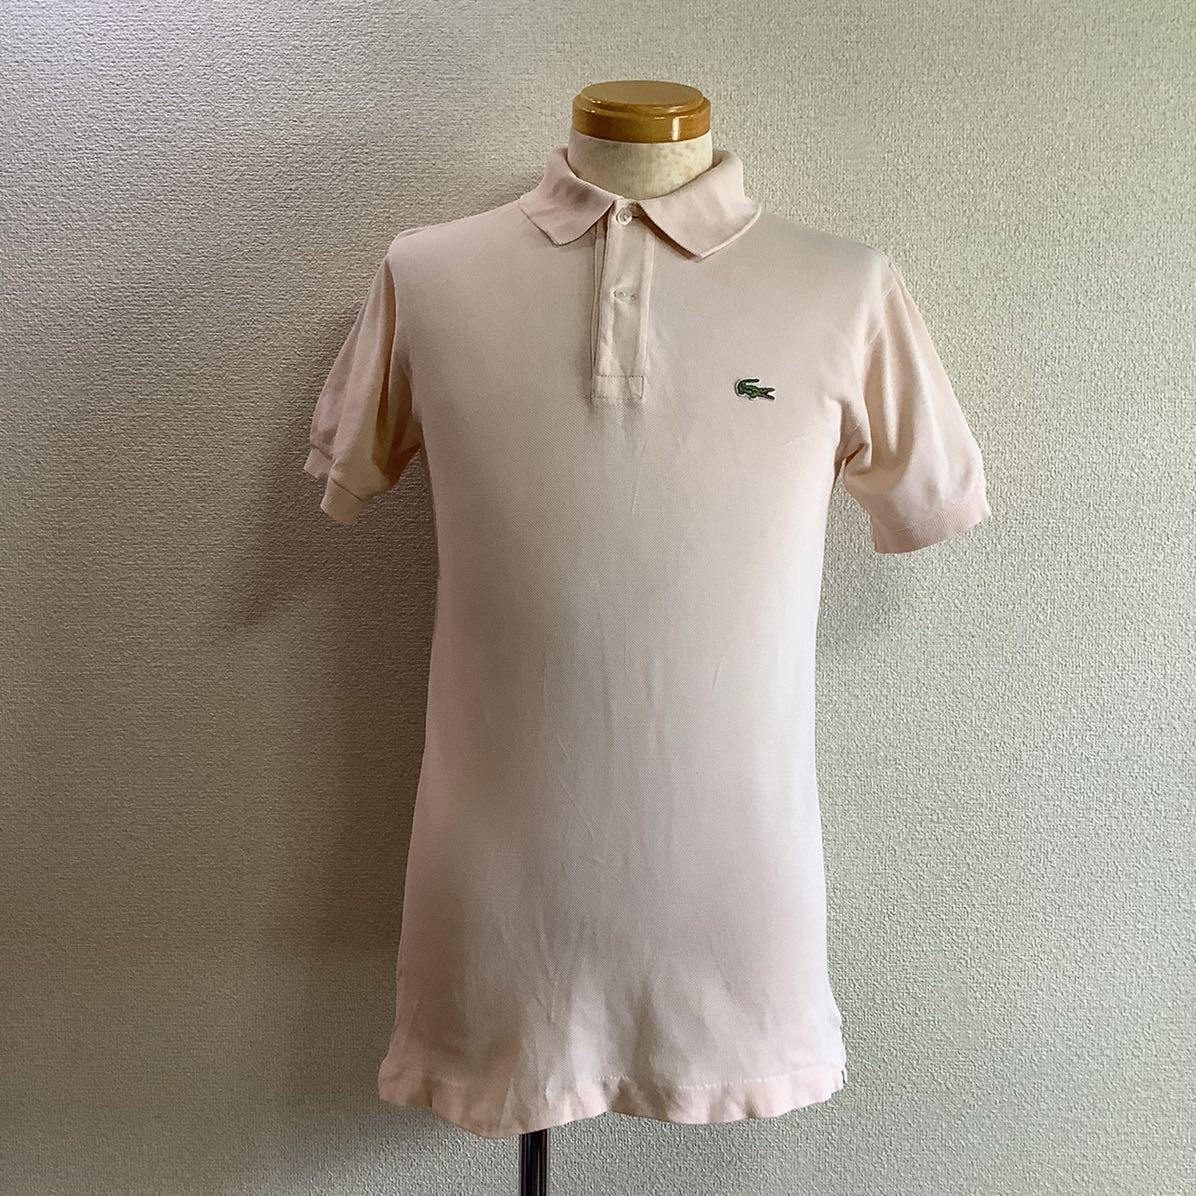 made in FRANCE】 70s フランス製 CHEMISE LACOSTE シュミーズラコステ